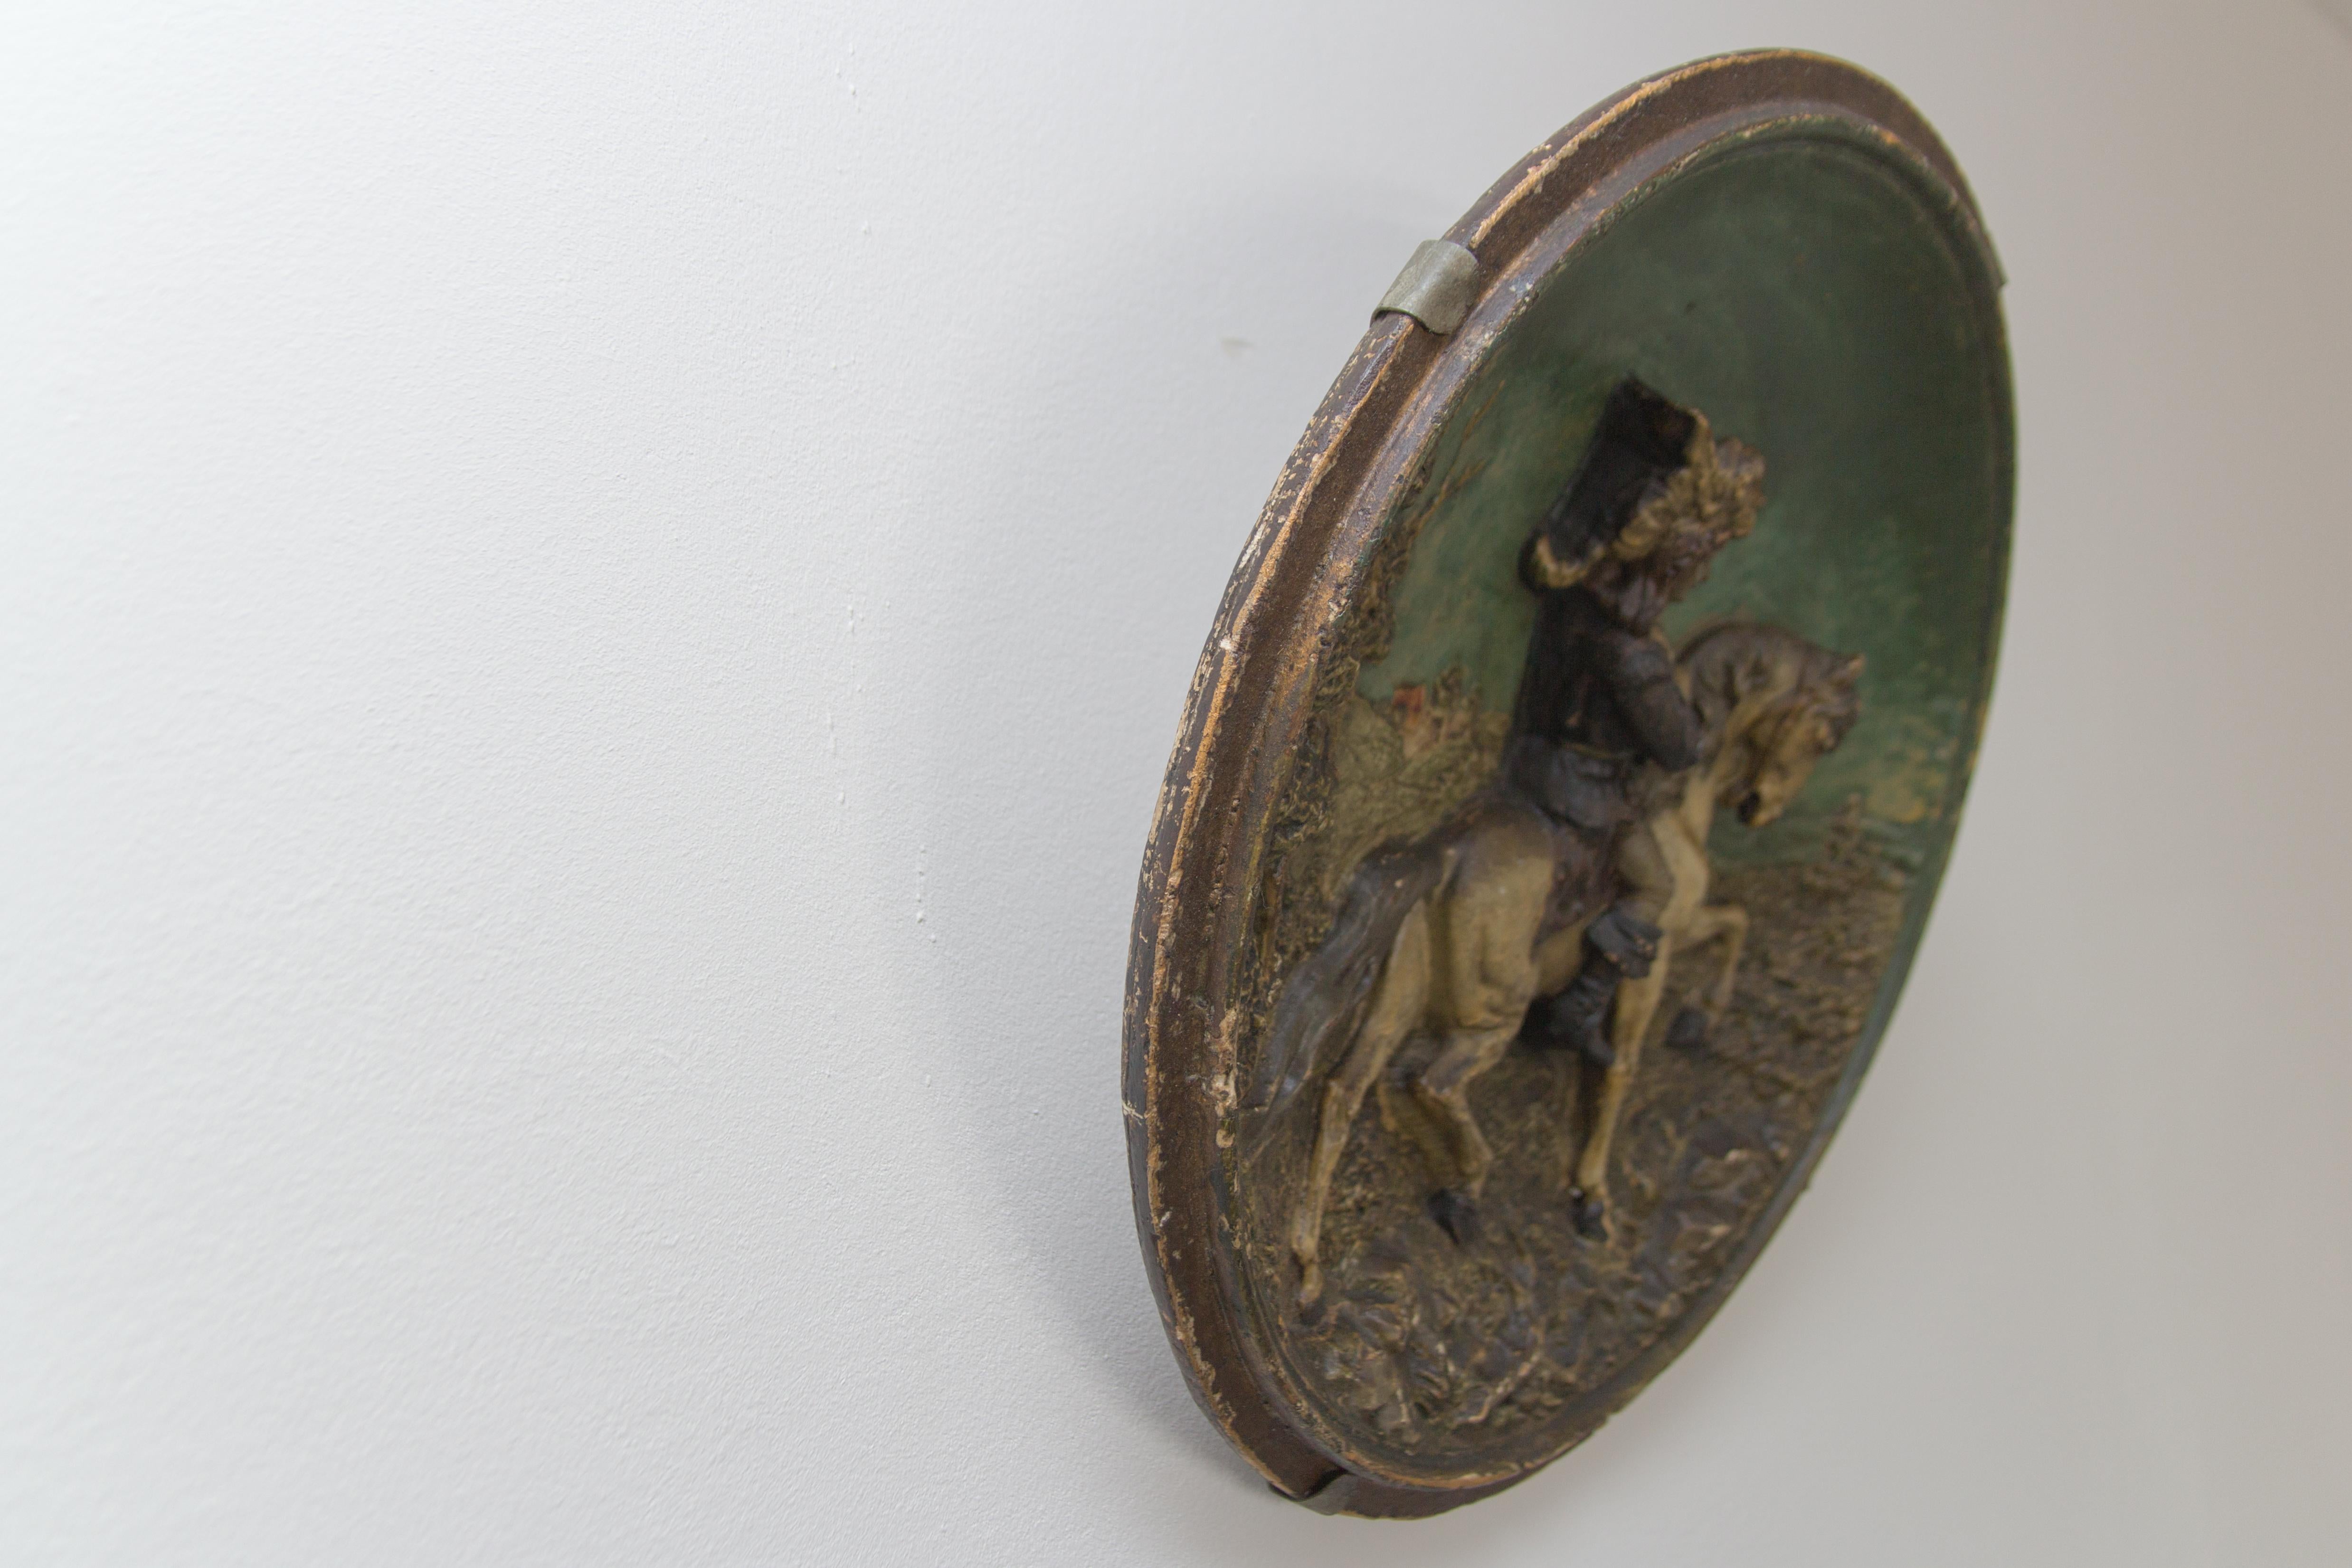 French wall plate made of plaster with relief depicting horse and rider, hunting. Made in early 20th Century.
Dimensions: diameter: 43 cm / 16.92 in; depth: 9 cm / 3.54 in
